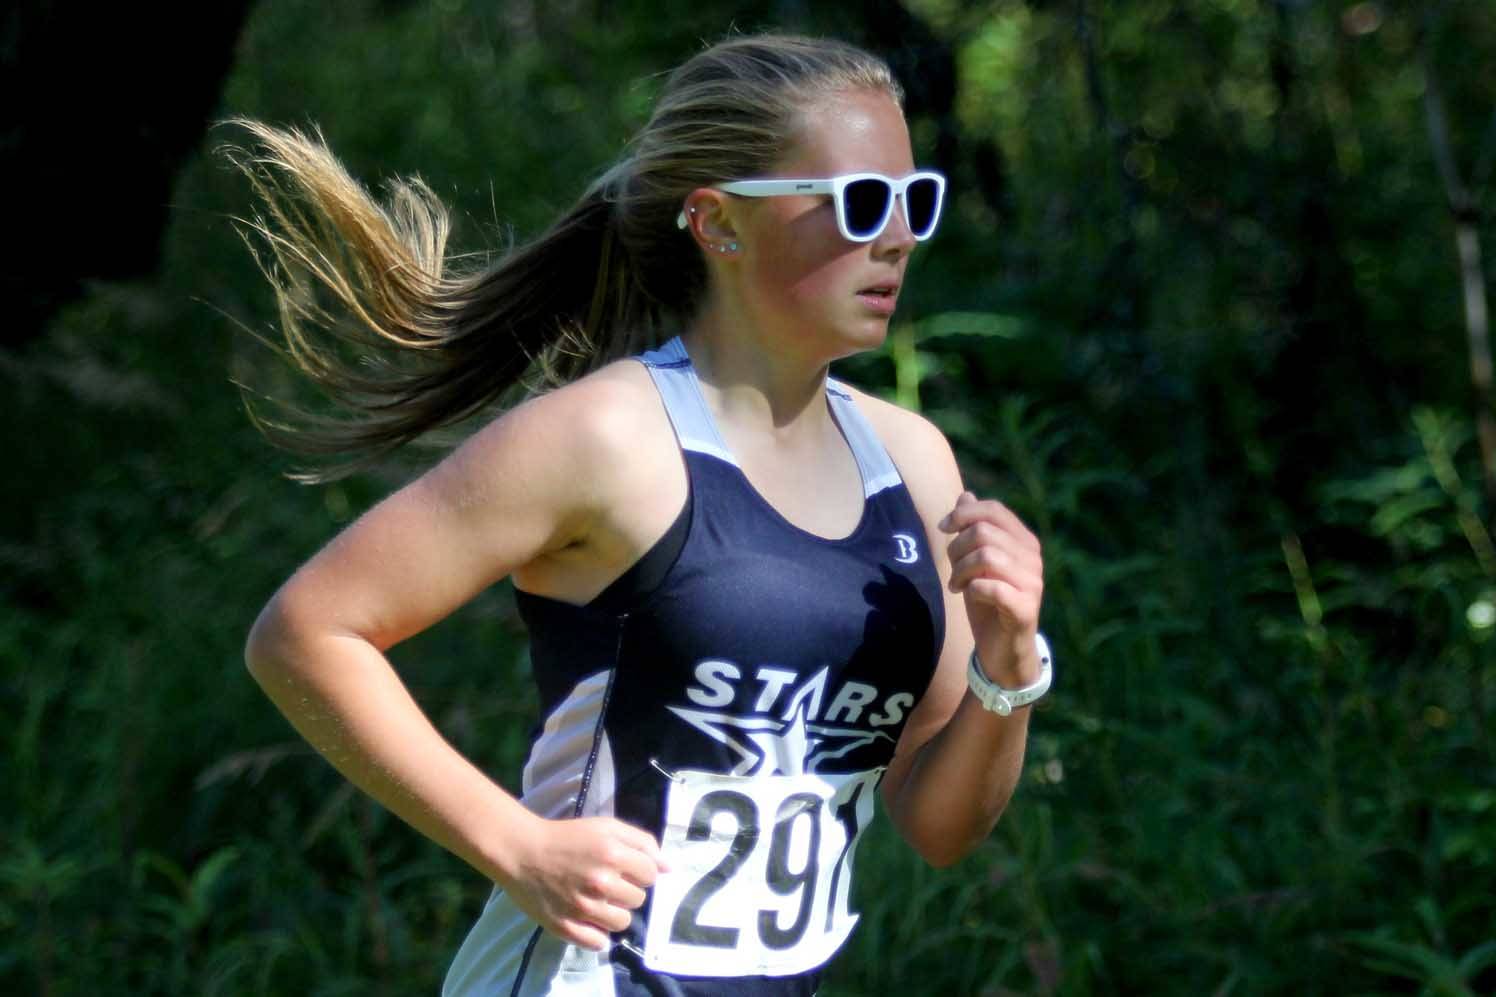 Soldotna’s Jordan Strausbaugh makes her way down the course during the Colony Invitational on Saturday, Aug. 28, 2021, at Colony High School. Strausbaugh finished fourth. (Photo by Jeremiah Bartz/Frontiersman)